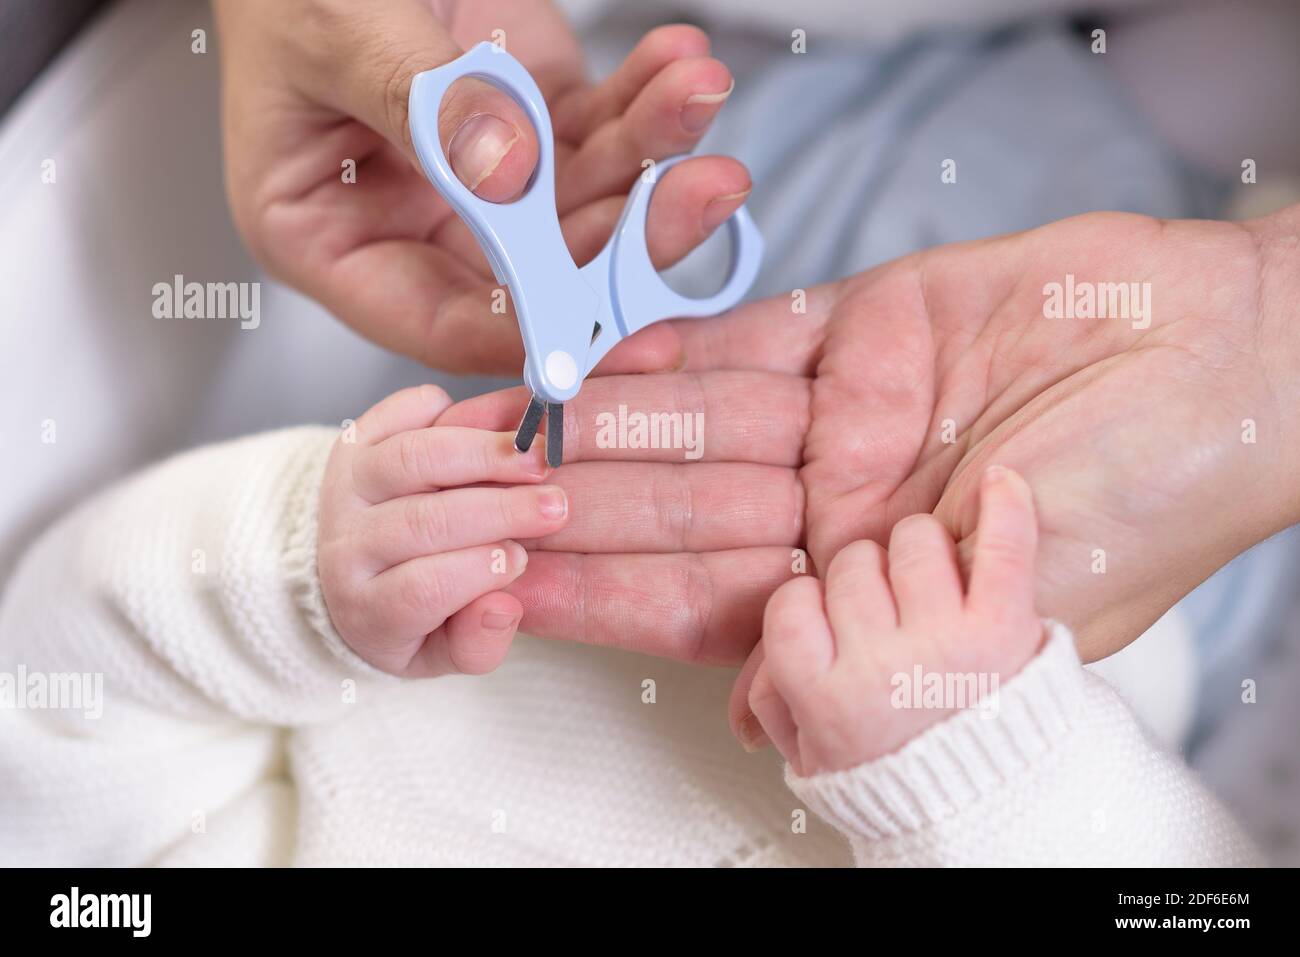 Mother caring for newborn nails. Affection, happiness, child care, newborn baby image Stock Photo